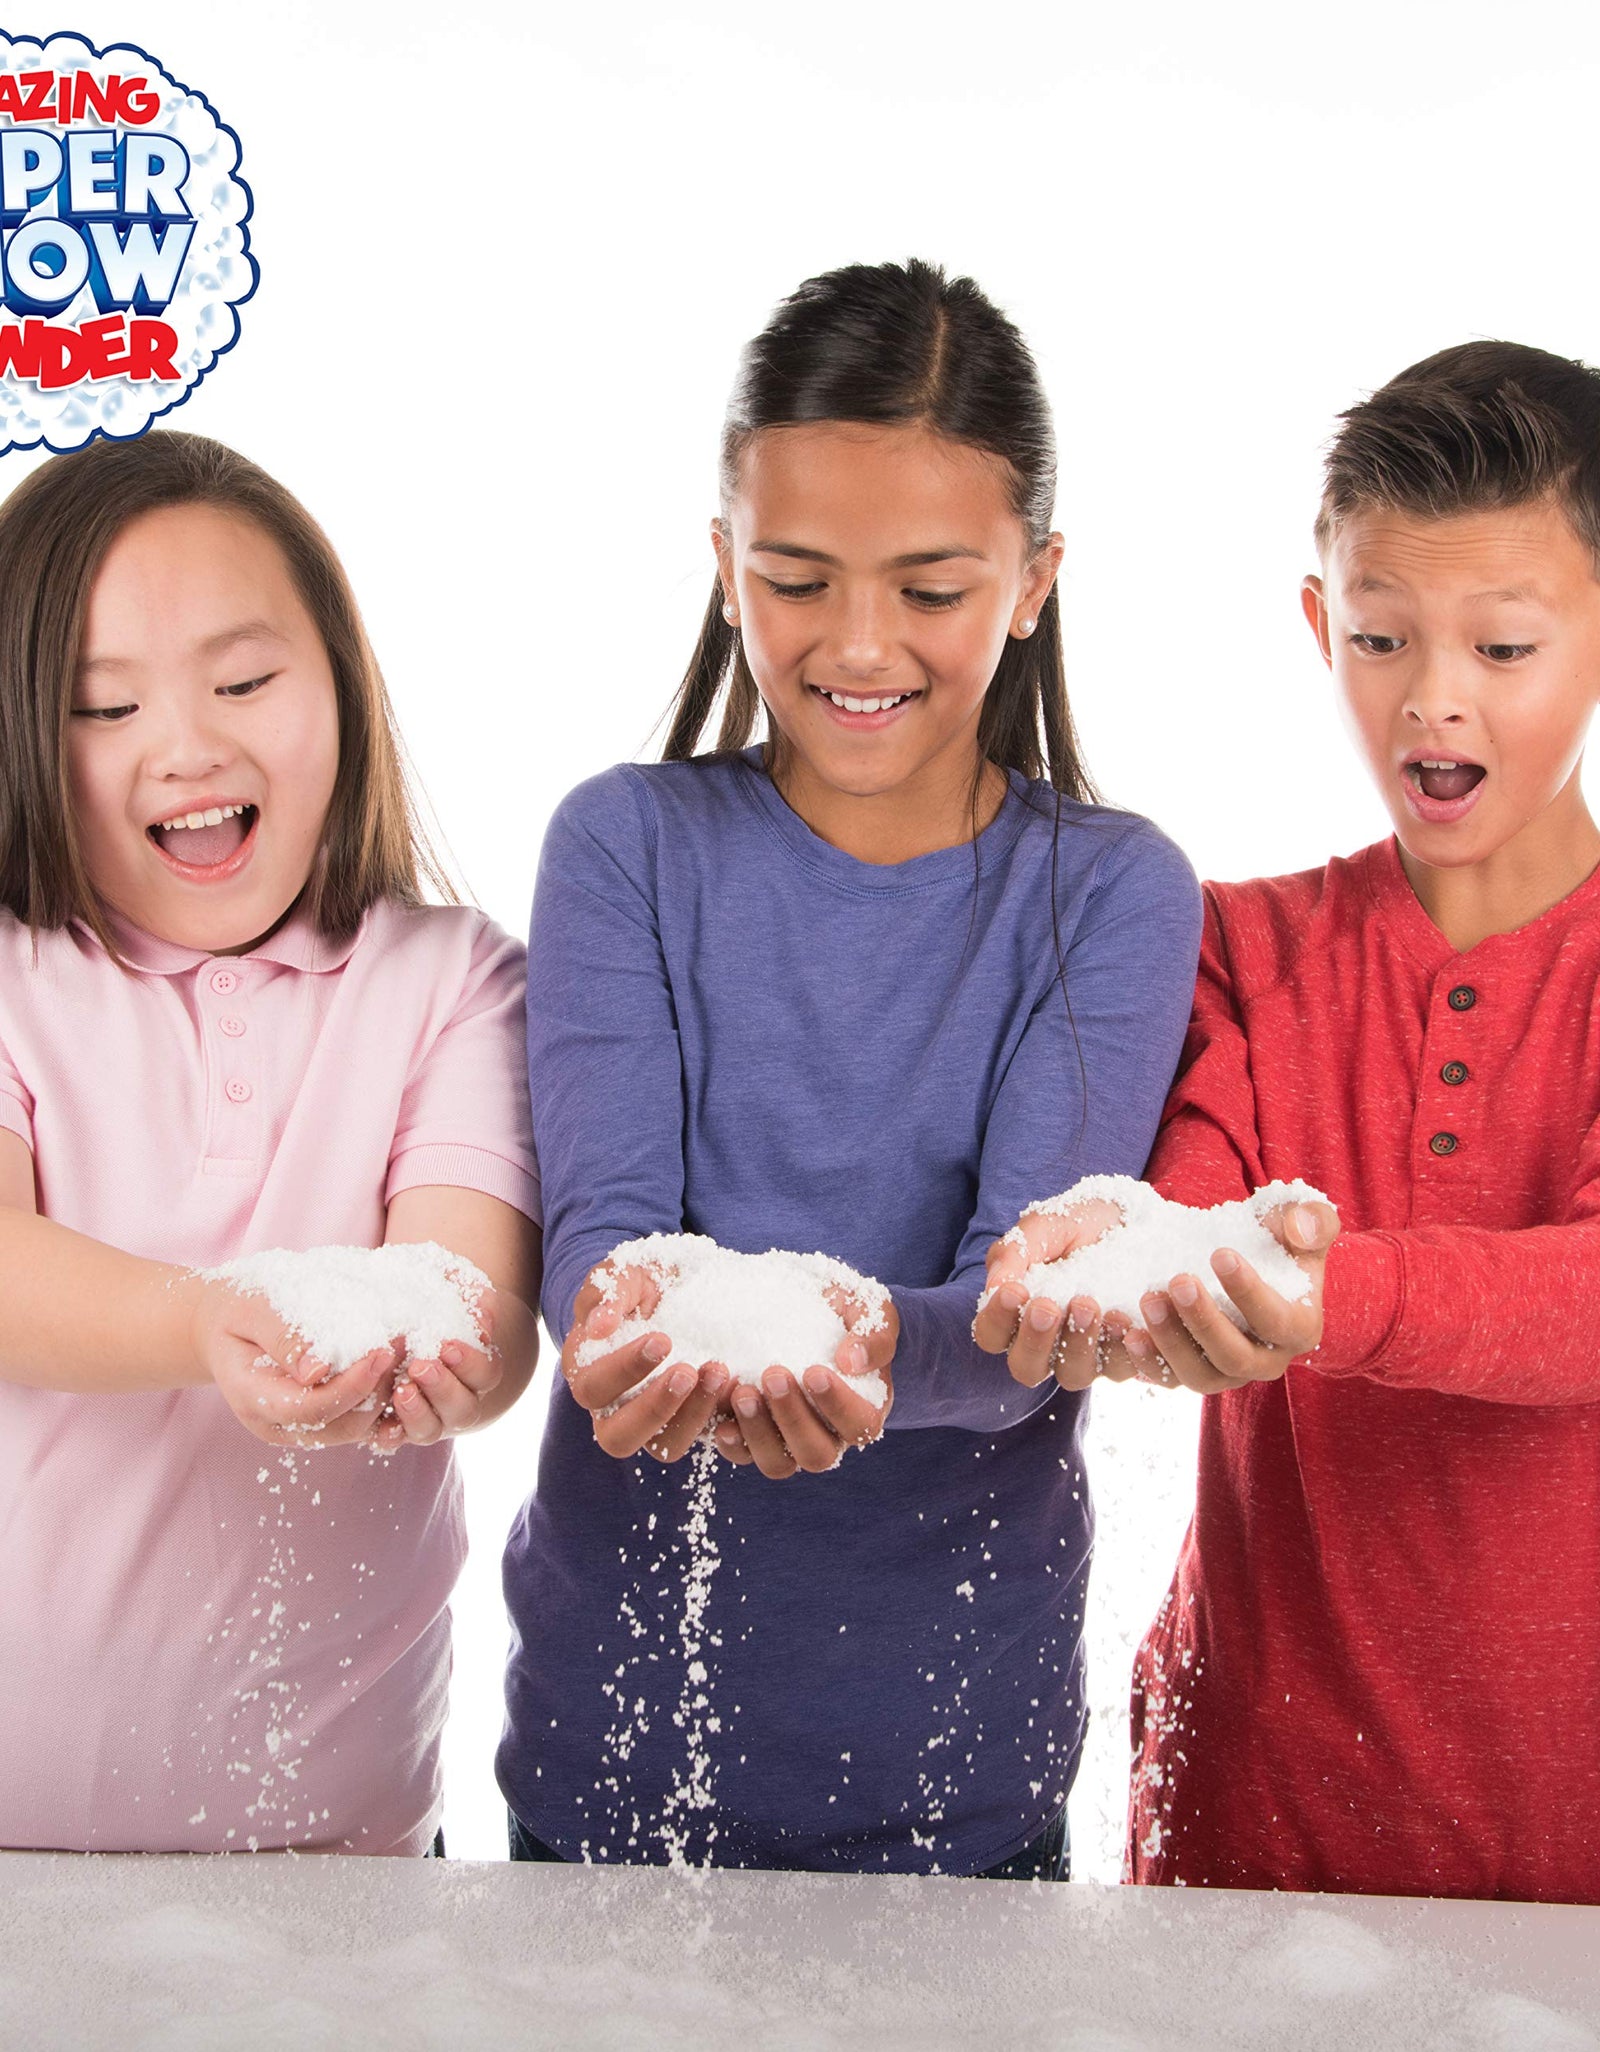 Amazing Super Snow Powder By Be Amazing! Toys Faux Snow Makes Over 2 Gallons Of Artificial Snow, Nontoxic Snow For Kids – Ages 4+